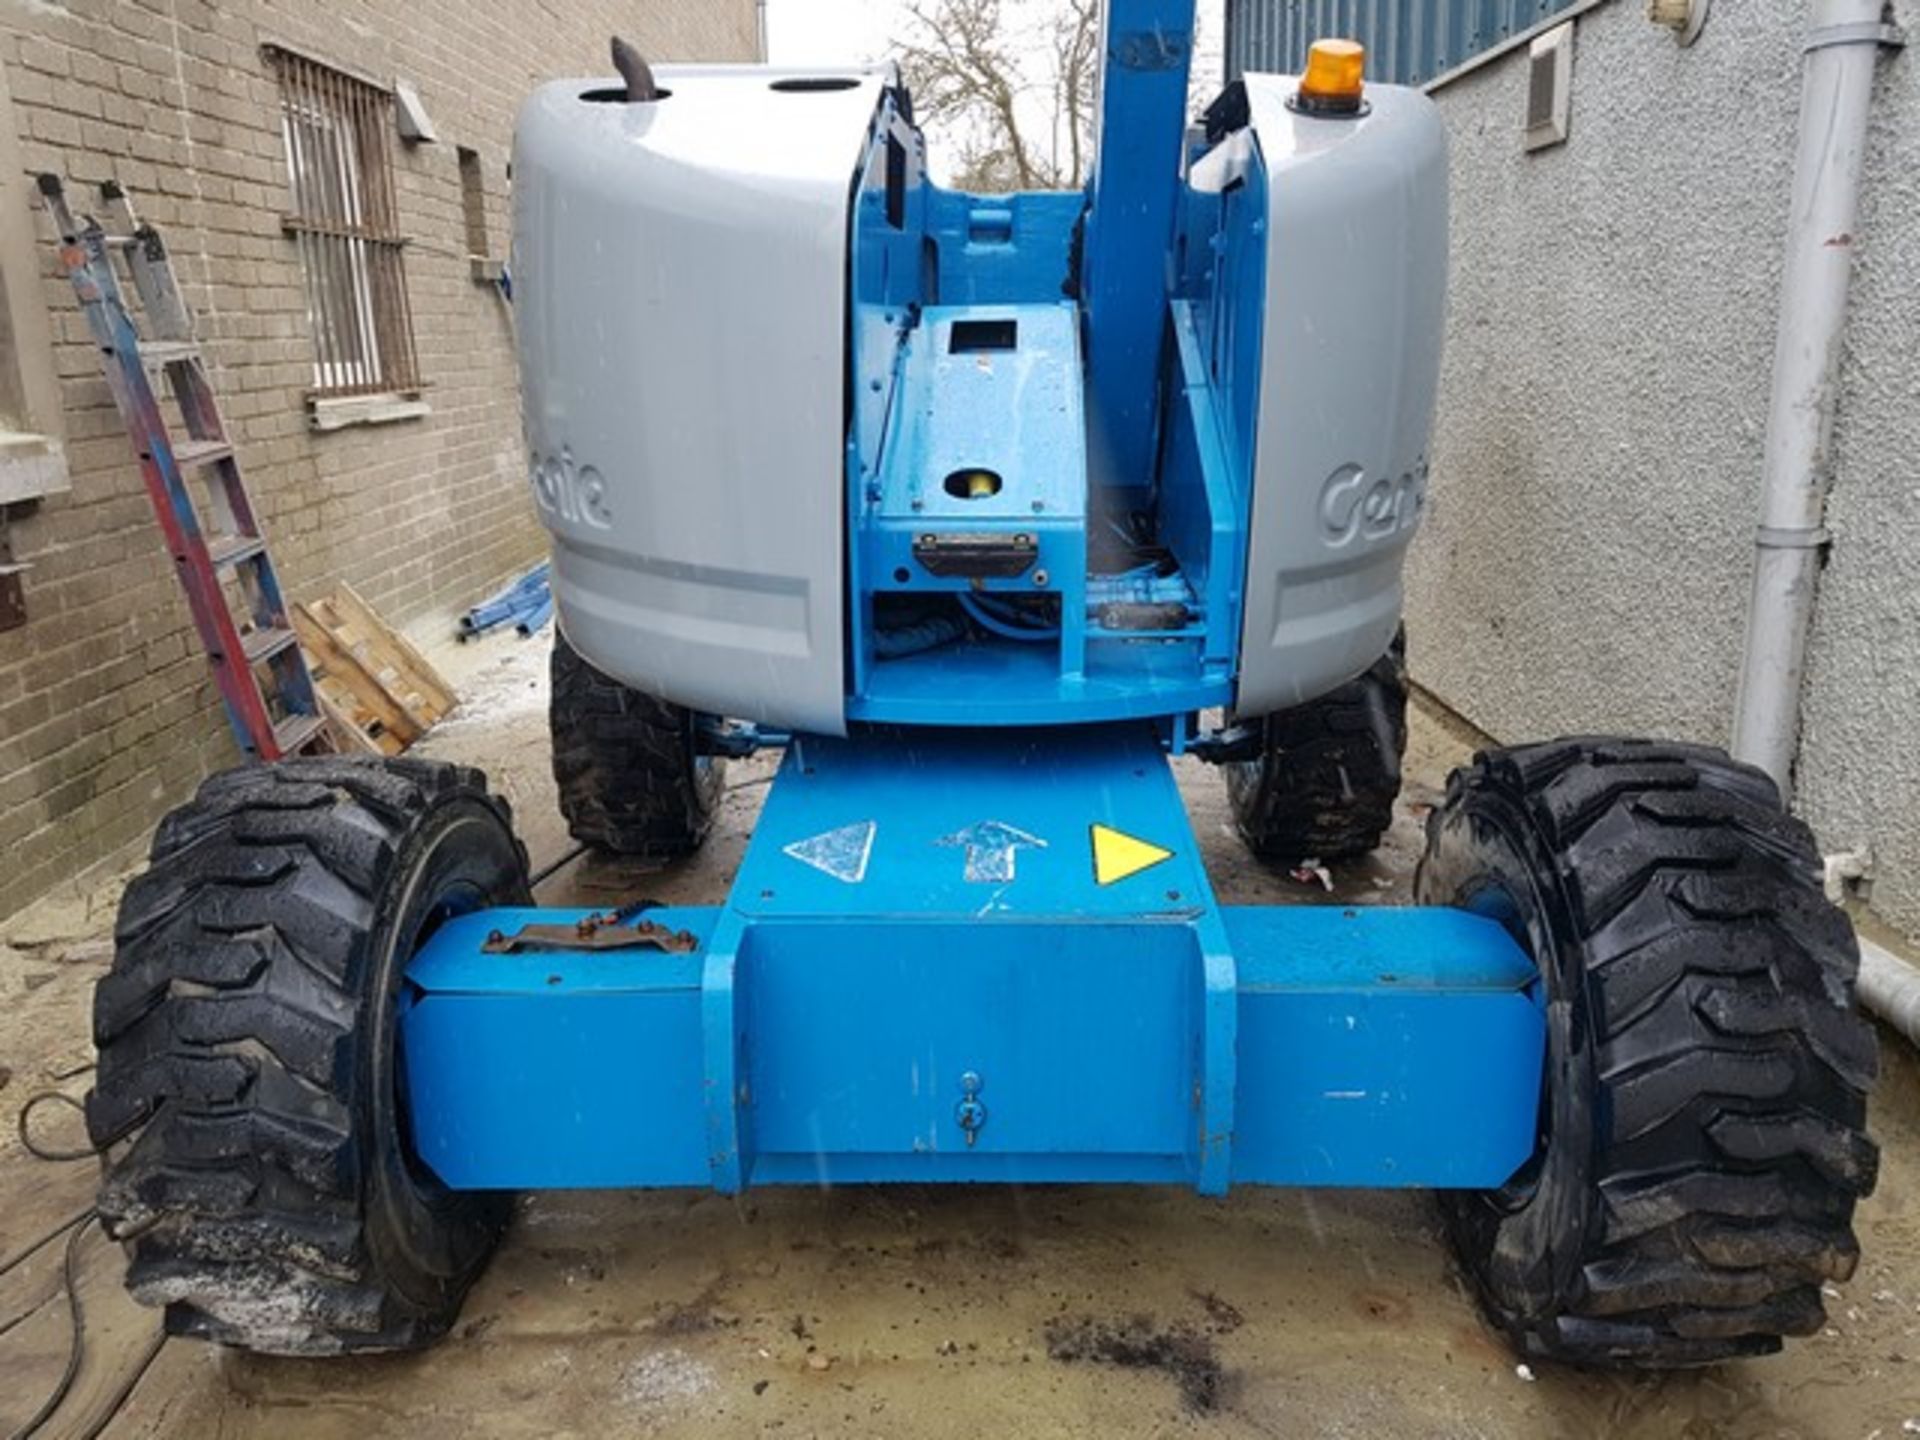 2000 GENIE MODEL Z45-25, S/N 15155, 8046HRS (NOT VERIFIED), LIFT CAPACITY - 230 - Image 9 of 17